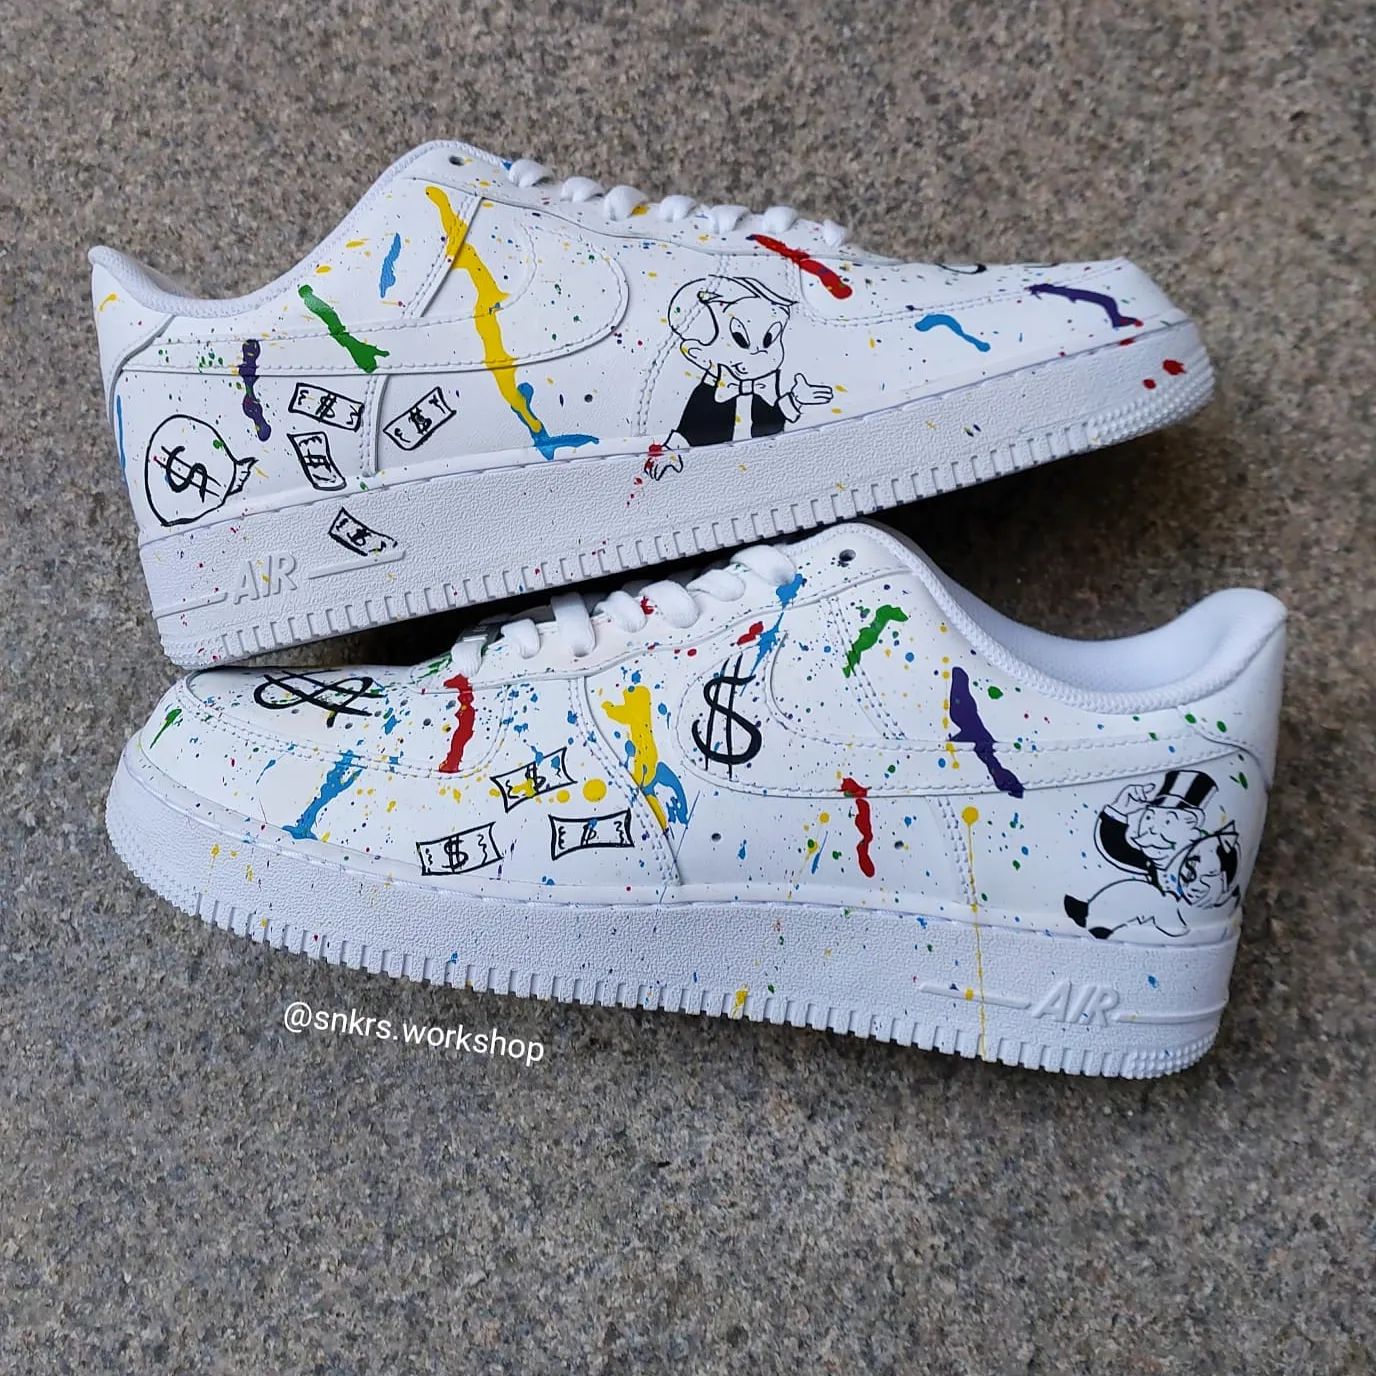 Nike Air Force 1 LV Custom Sneakers Monopoly Richie Rich Shoes 10